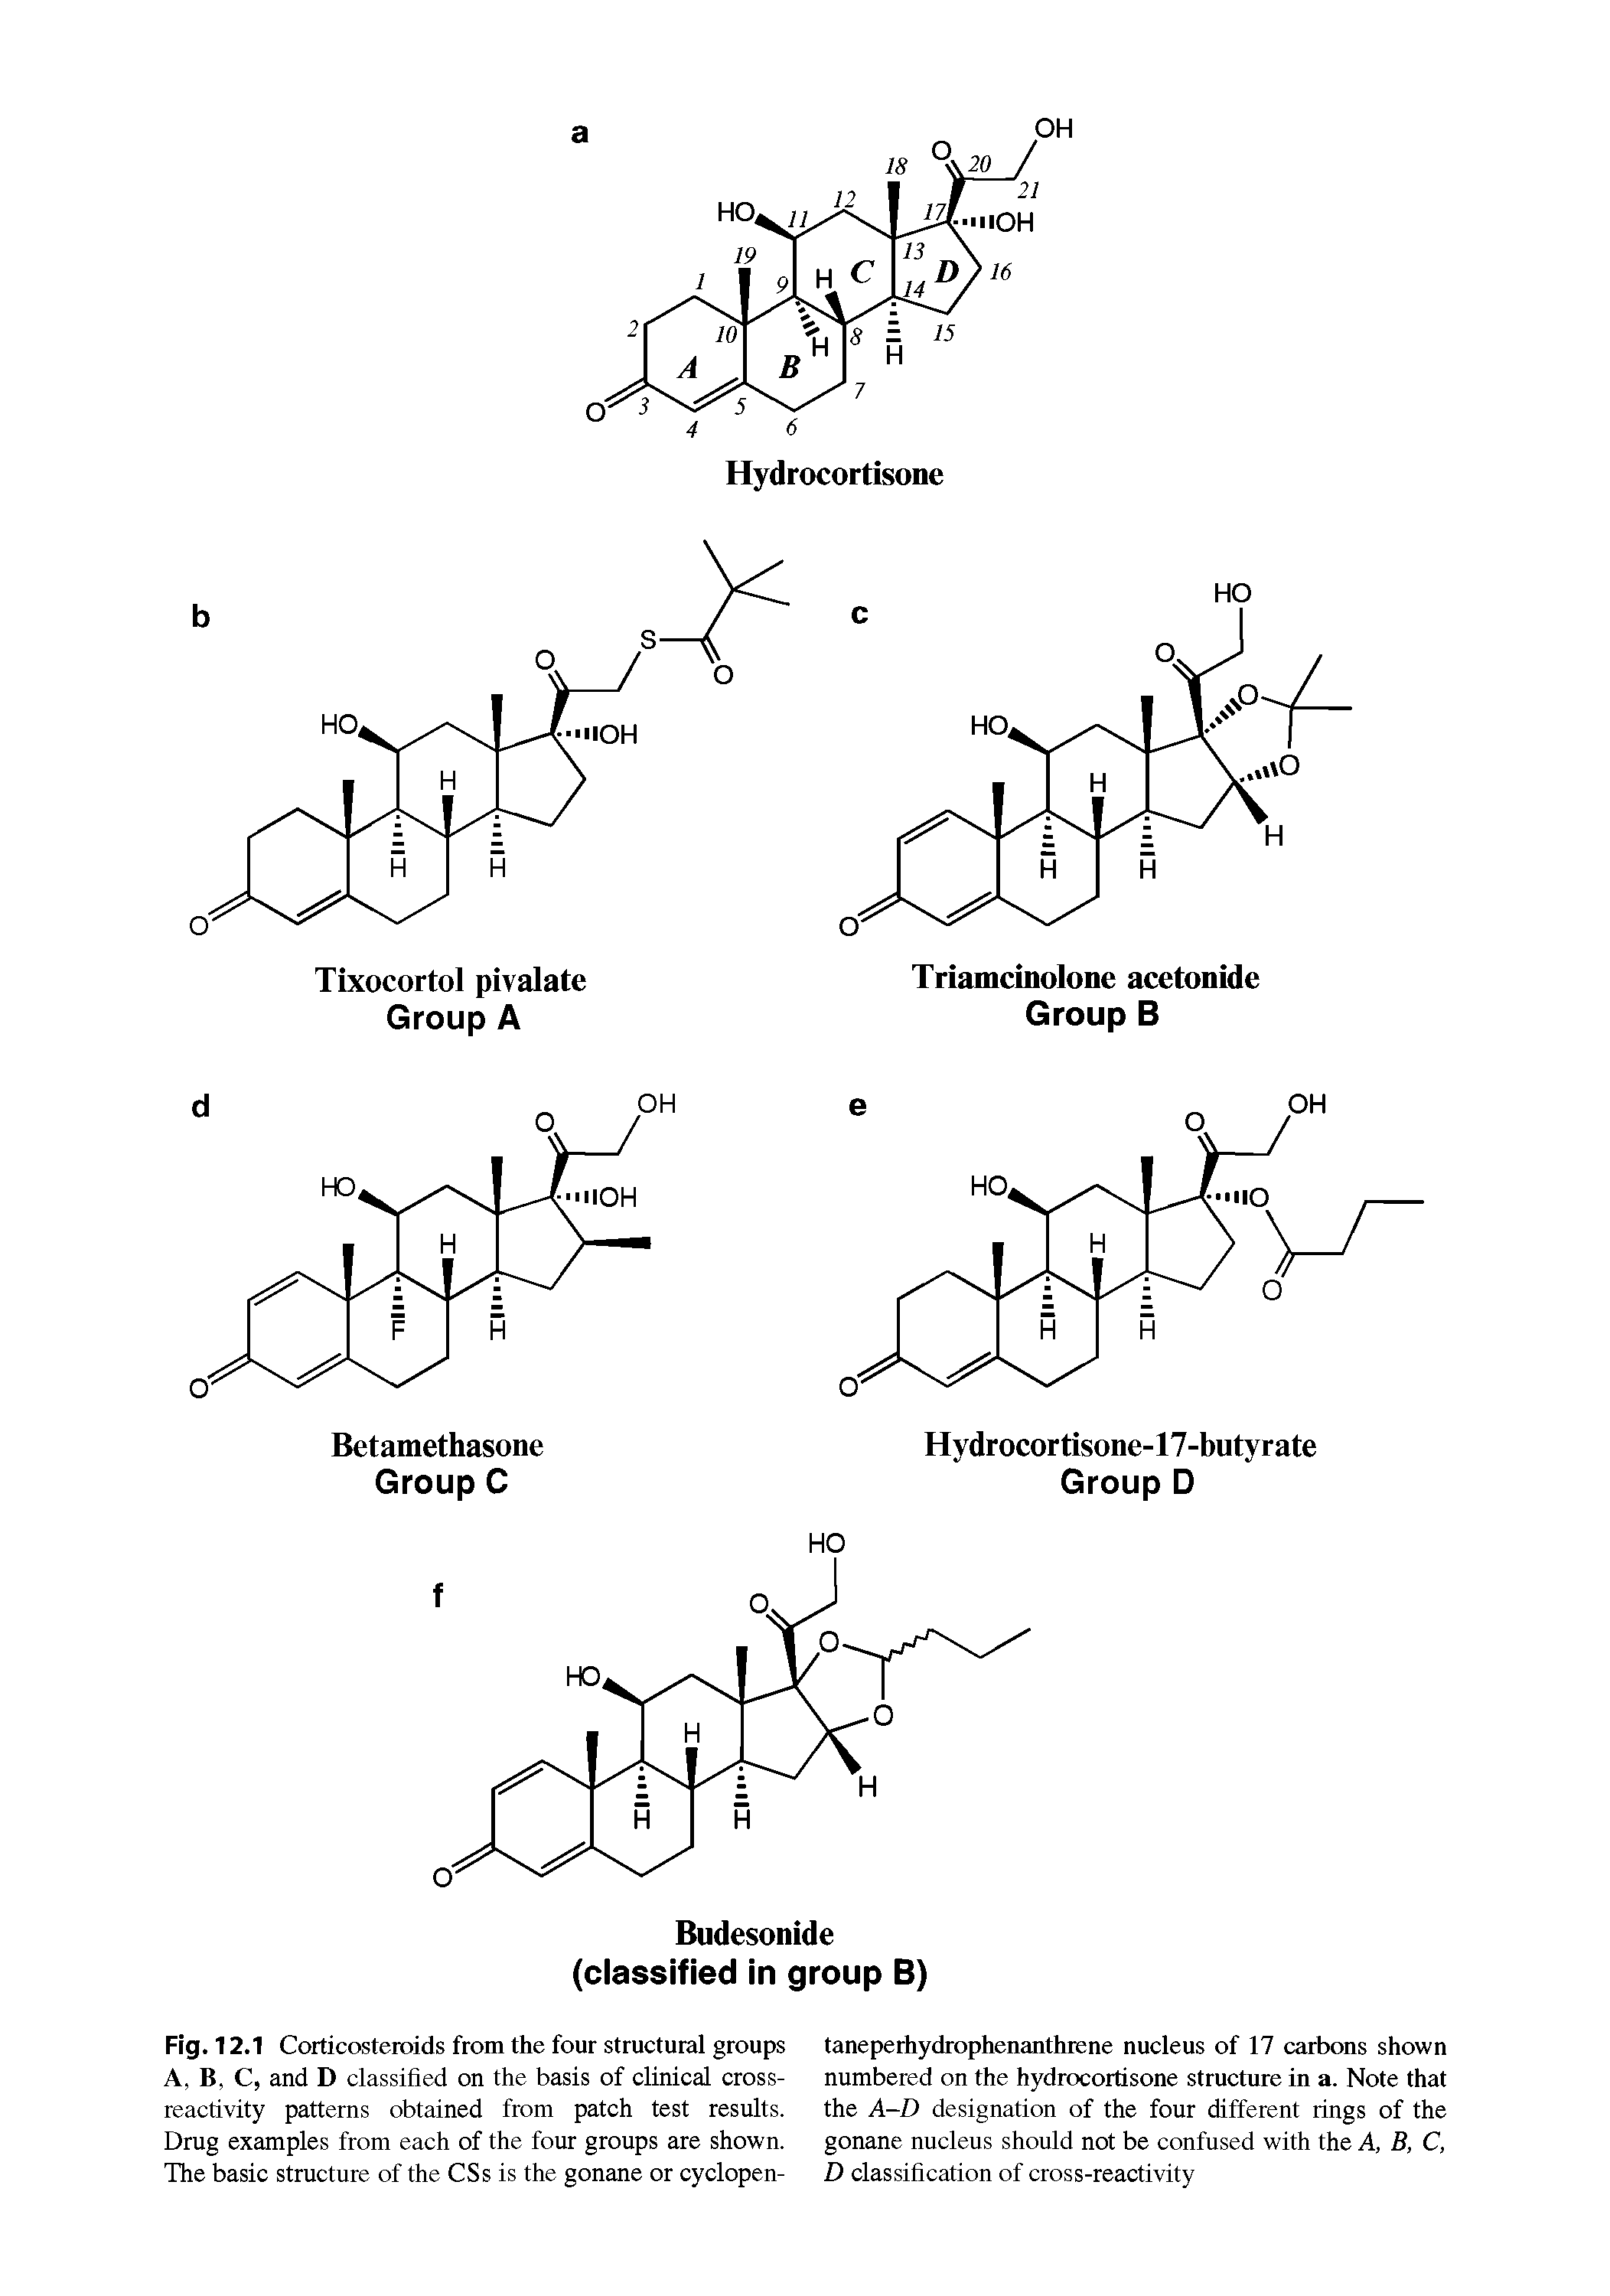 Fig. 12.1 Corticosteroids from the four structural groups taneperhydrophenanthrene nucleus of 17 carbons shown A, B, C, and D classified on the basis of clinical cross- numbered on the hydrocortisone structure in a. Note that...